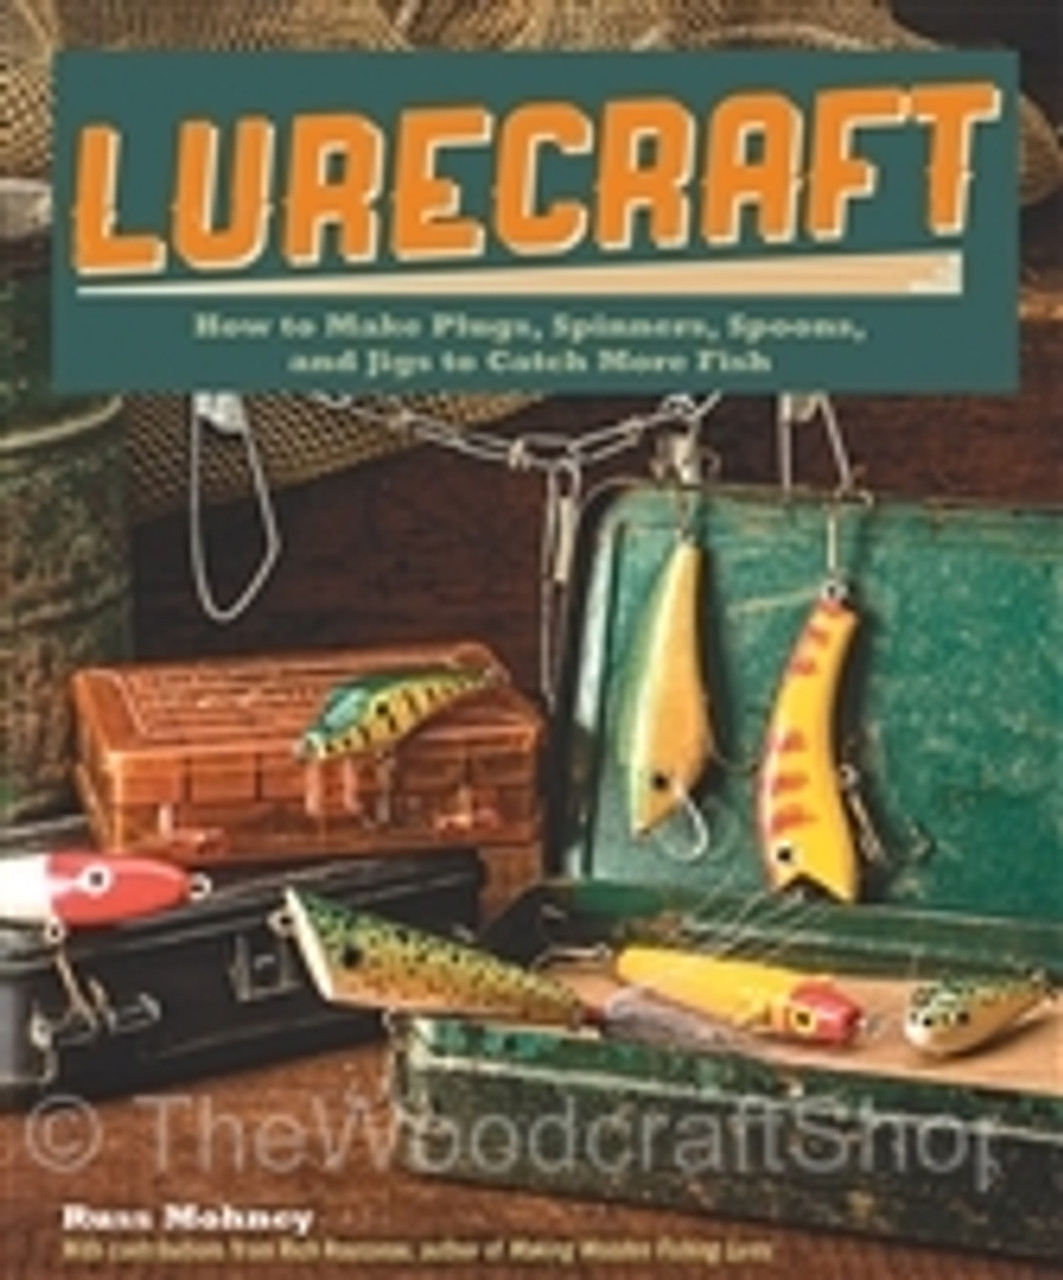 Lurecraft- How to Make Plugs, Spinners, Jigs to Catch More Fish